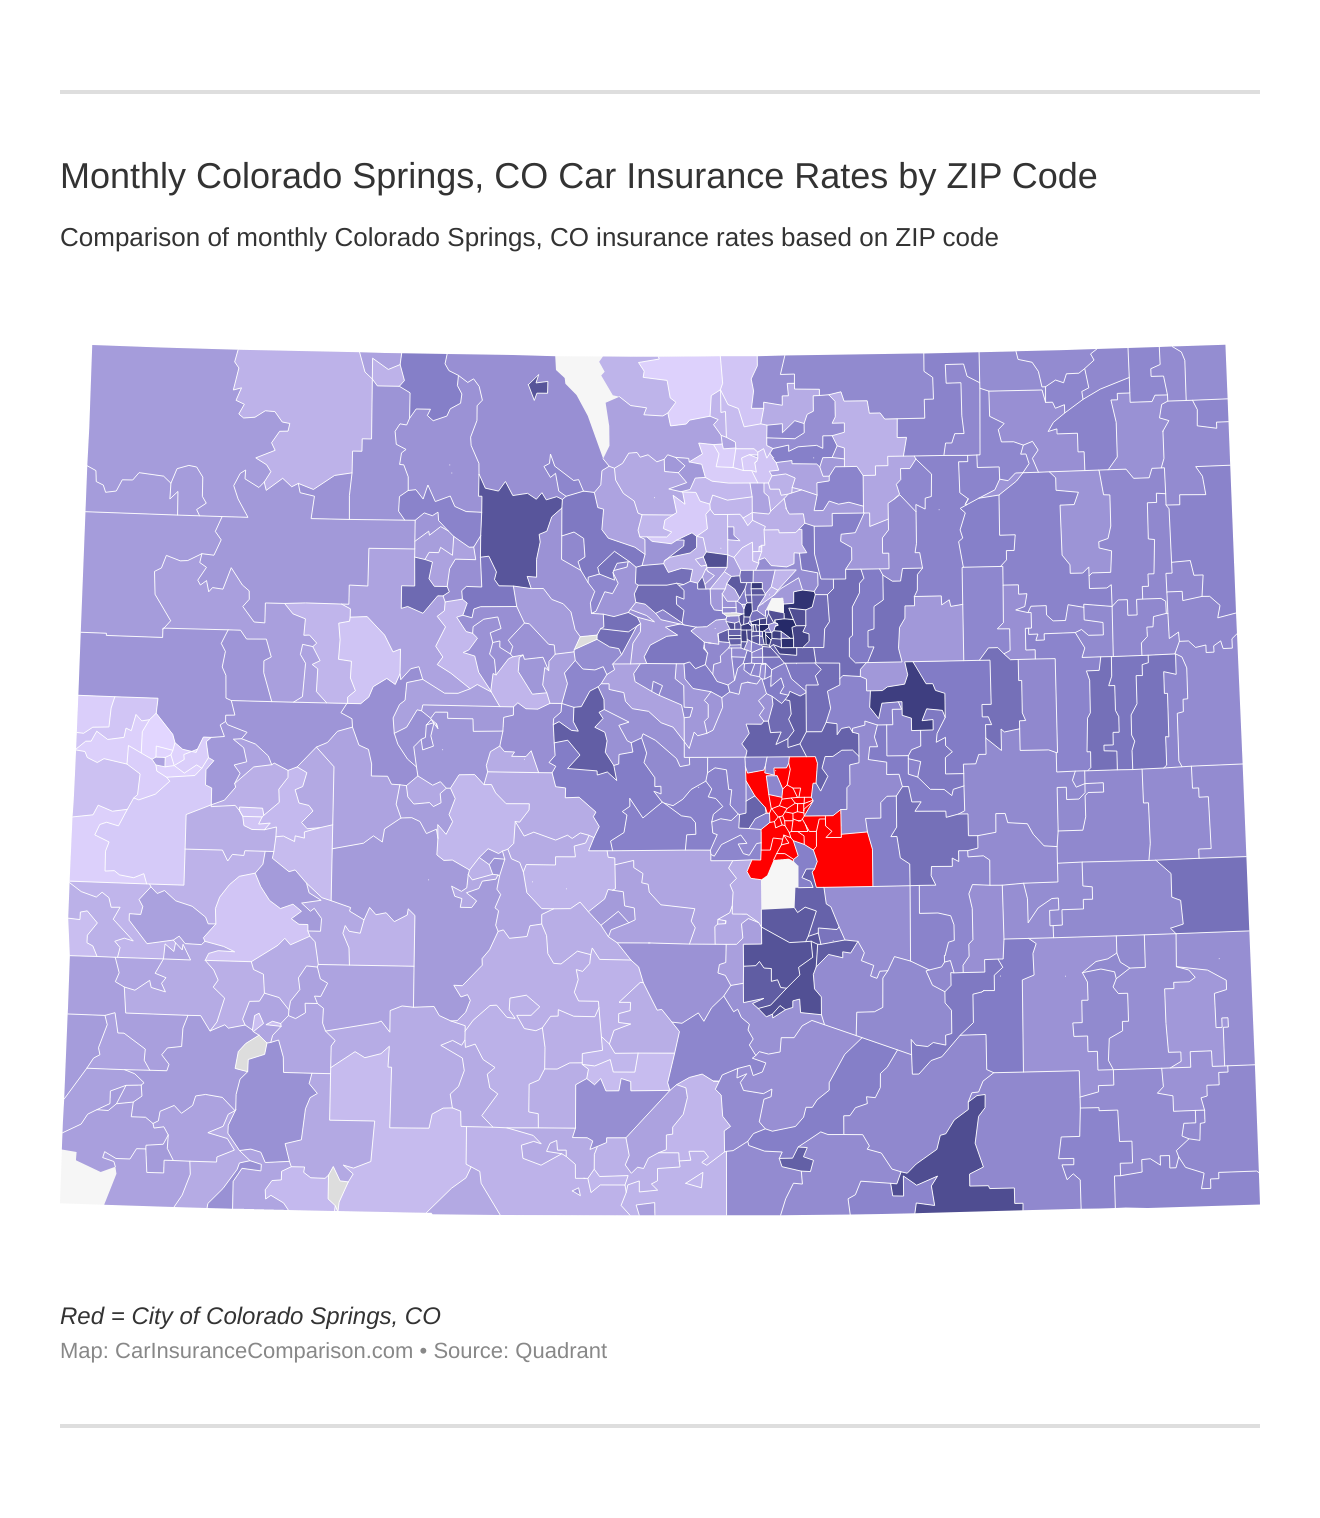 Monthly Colorado Springs, CO Car Insurance Rates by ZIP Code